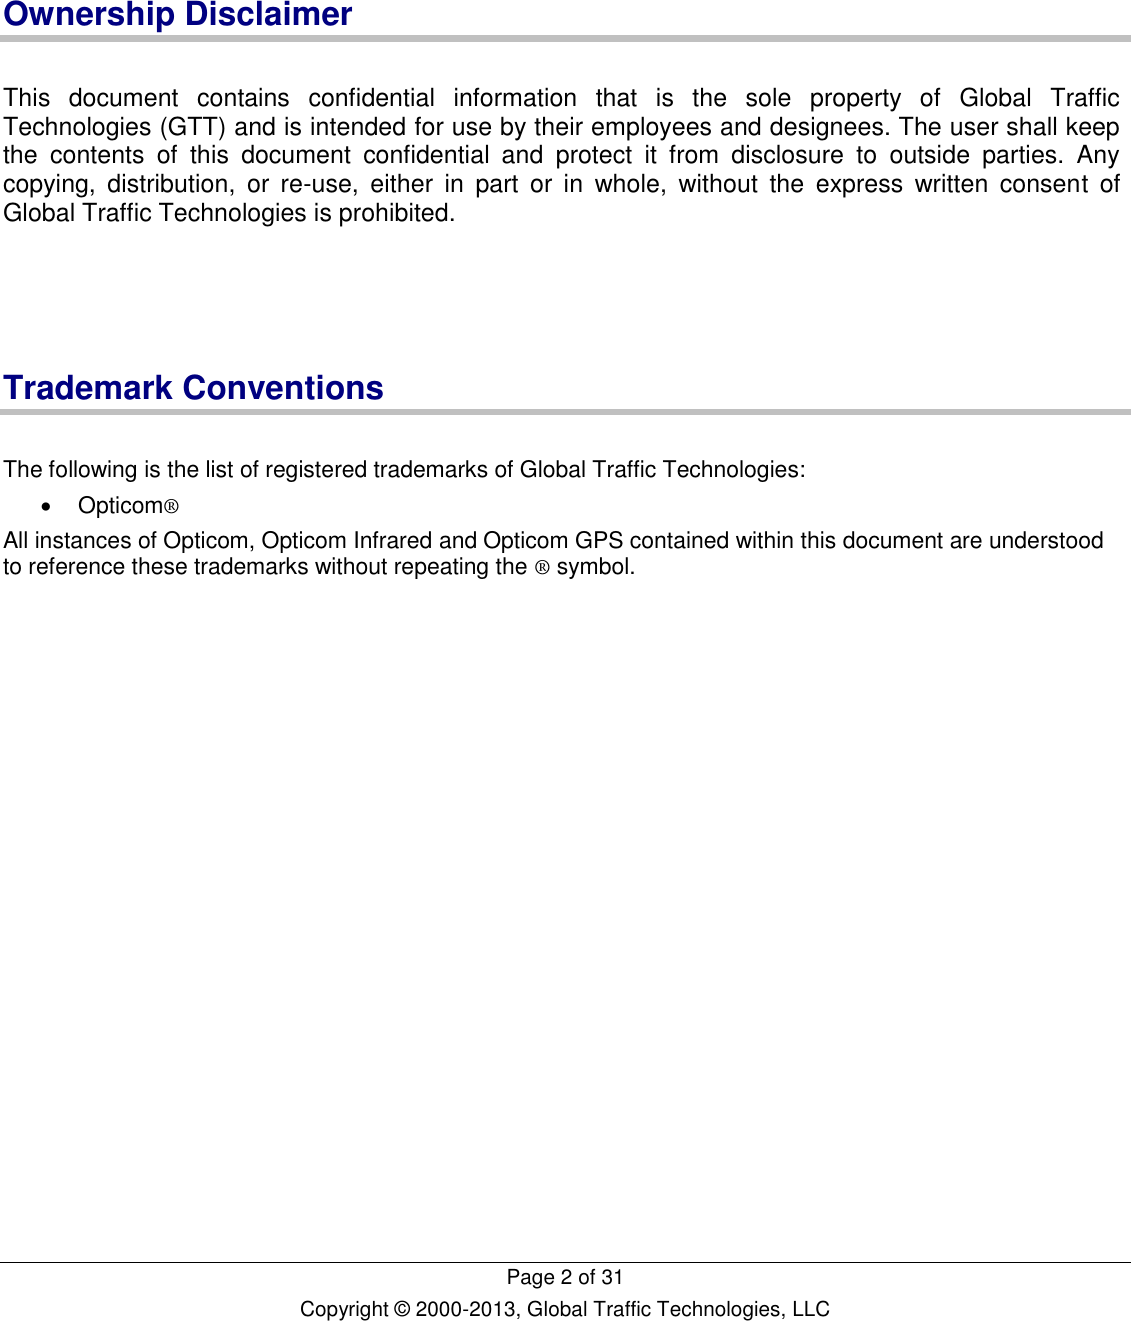   Page 2 of 31 Copyright © 2000-2013, Global Traffic Technologies, LLC    Ownership Disclaimer  This  document  contains  confidential  information  that  is  the  sole  property  of  Global  Traffic Technologies (GTT) and is intended for use by their employees and designees. The user shall keep the  contents  of  this  document  confidential  and  protect  it  from  disclosure  to  outside  parties.  Any copying,  distribution,  or  re-use,  either  in  part  or  in  whole,  without  the  express  written  consent  of Global Traffic Technologies is prohibited.     Trademark Conventions  The following is the list of registered trademarks of Global Traffic Technologies:   Opticom® All instances of Opticom, Opticom Infrared and Opticom GPS contained within this document are understood to reference these trademarks without repeating the ® symbol.    